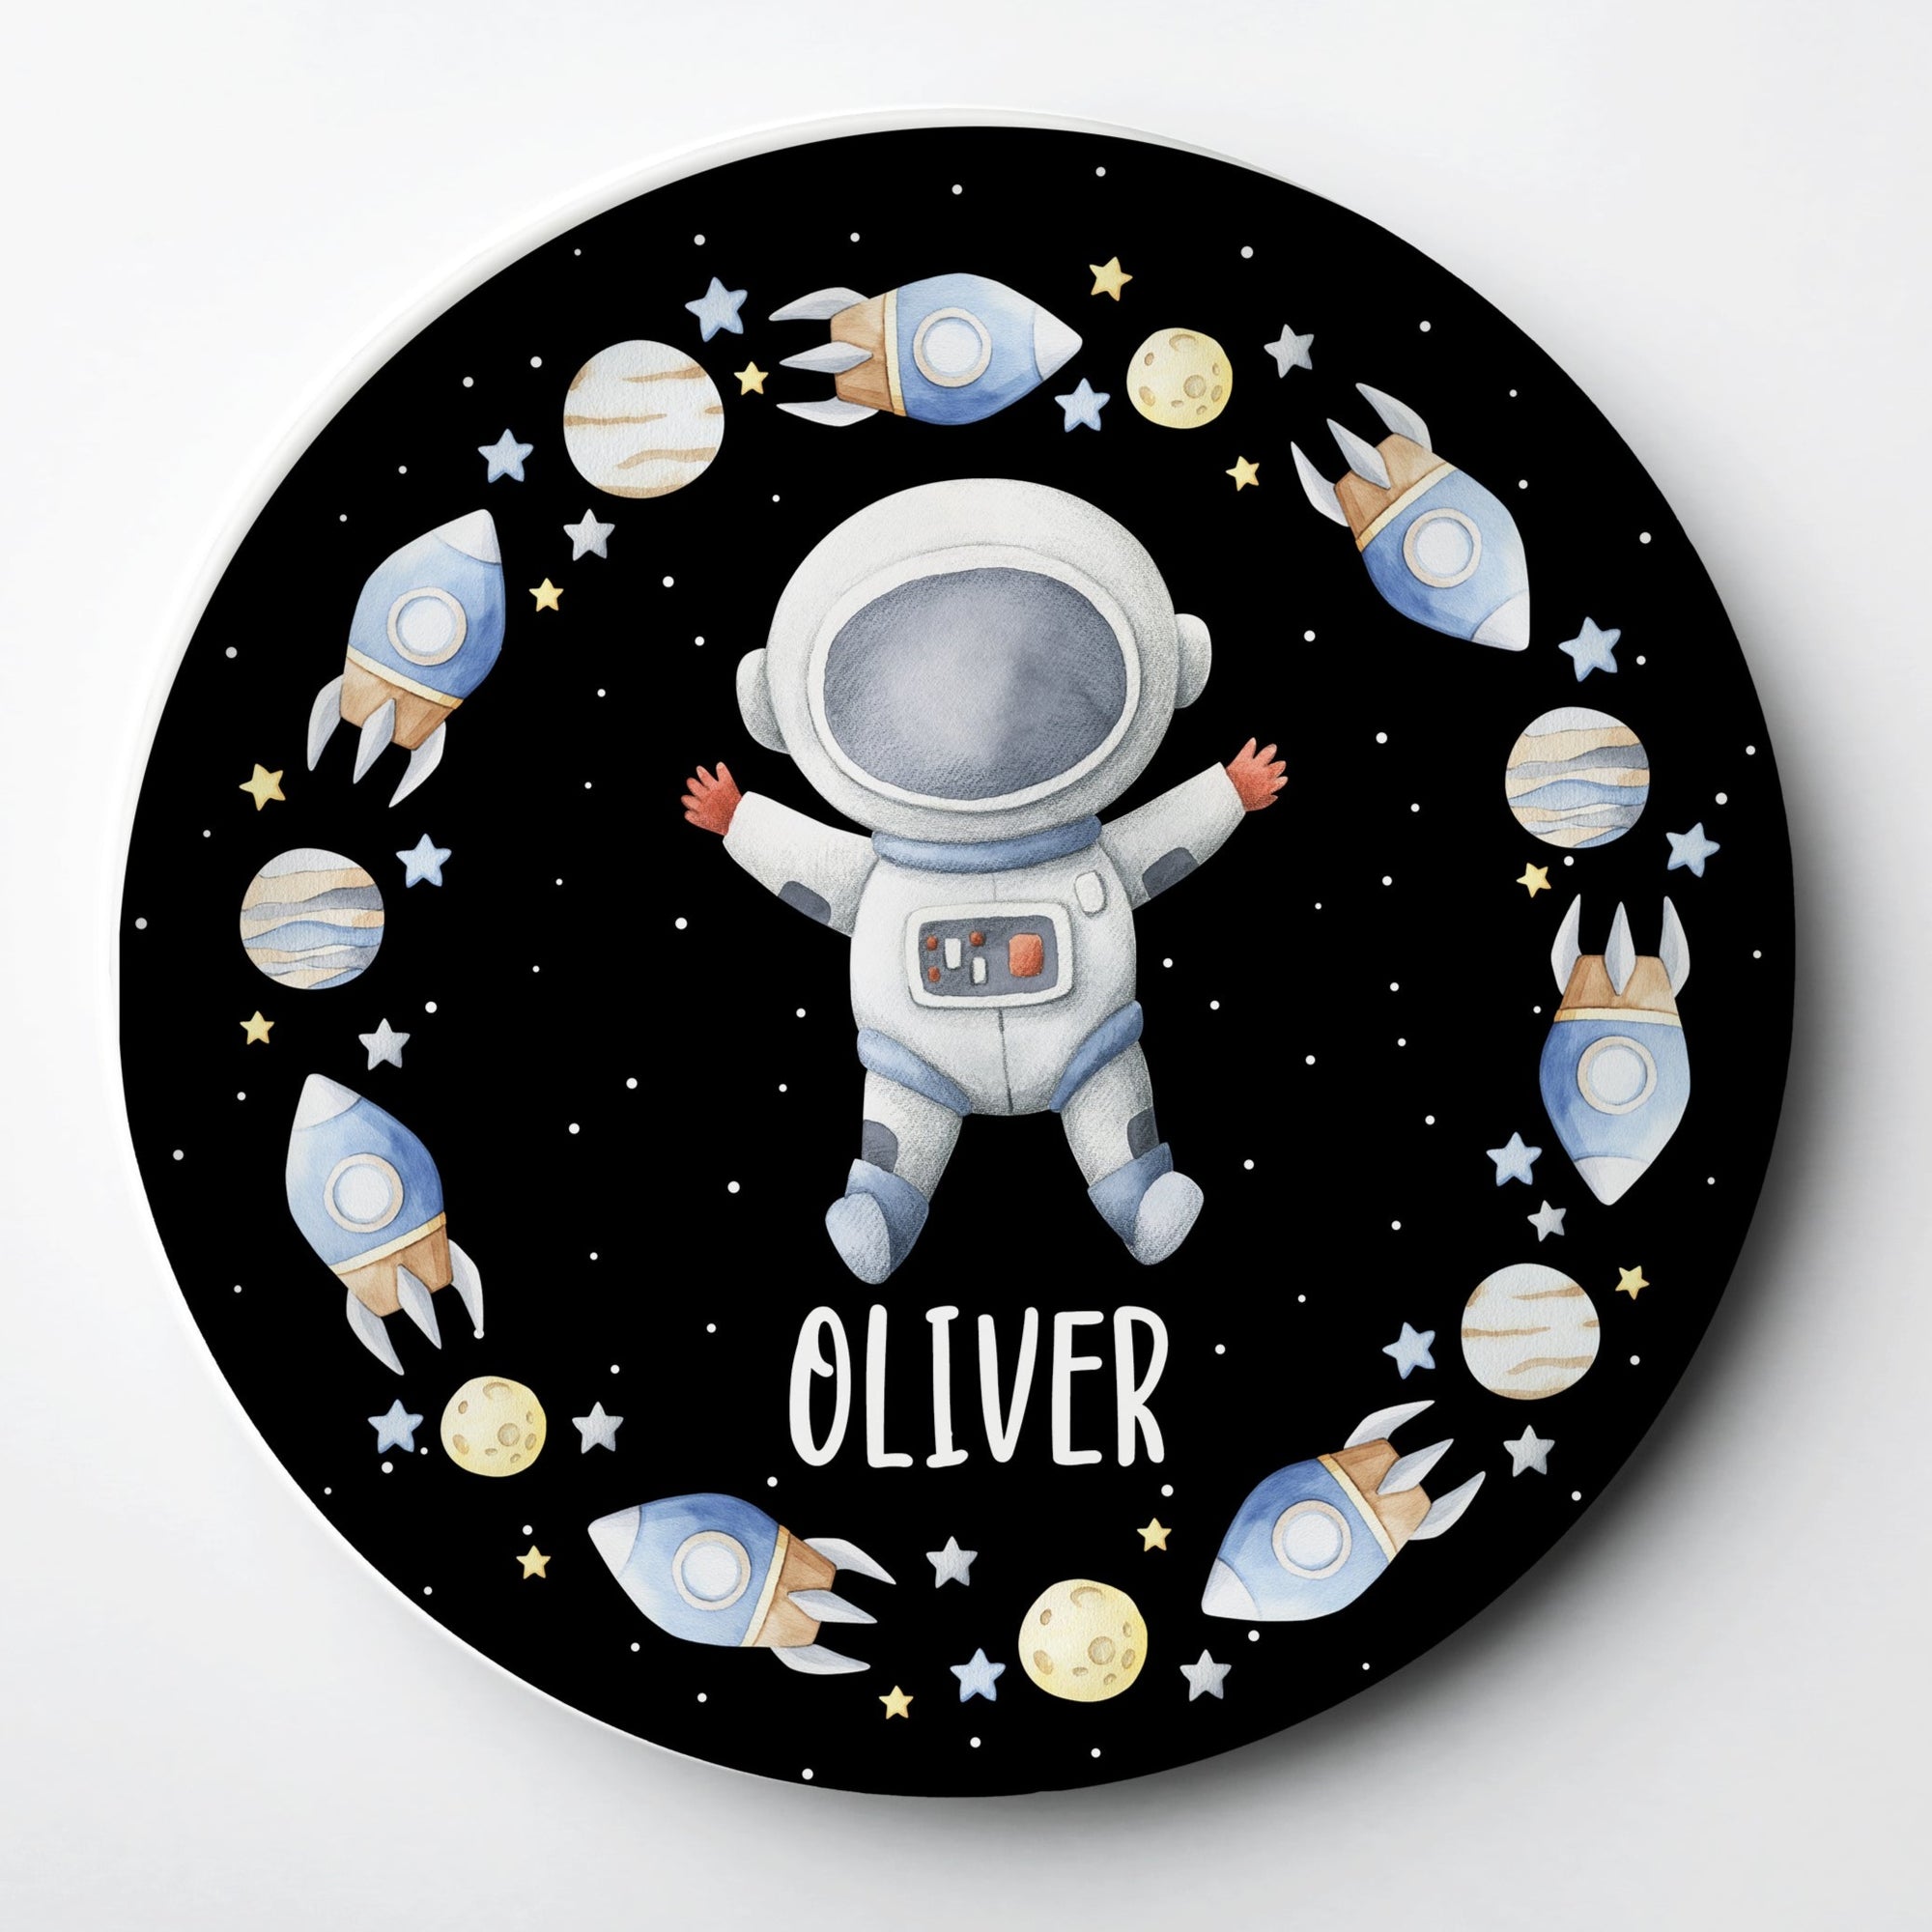 Personalized Kid's Plate with an astronaut in outer space